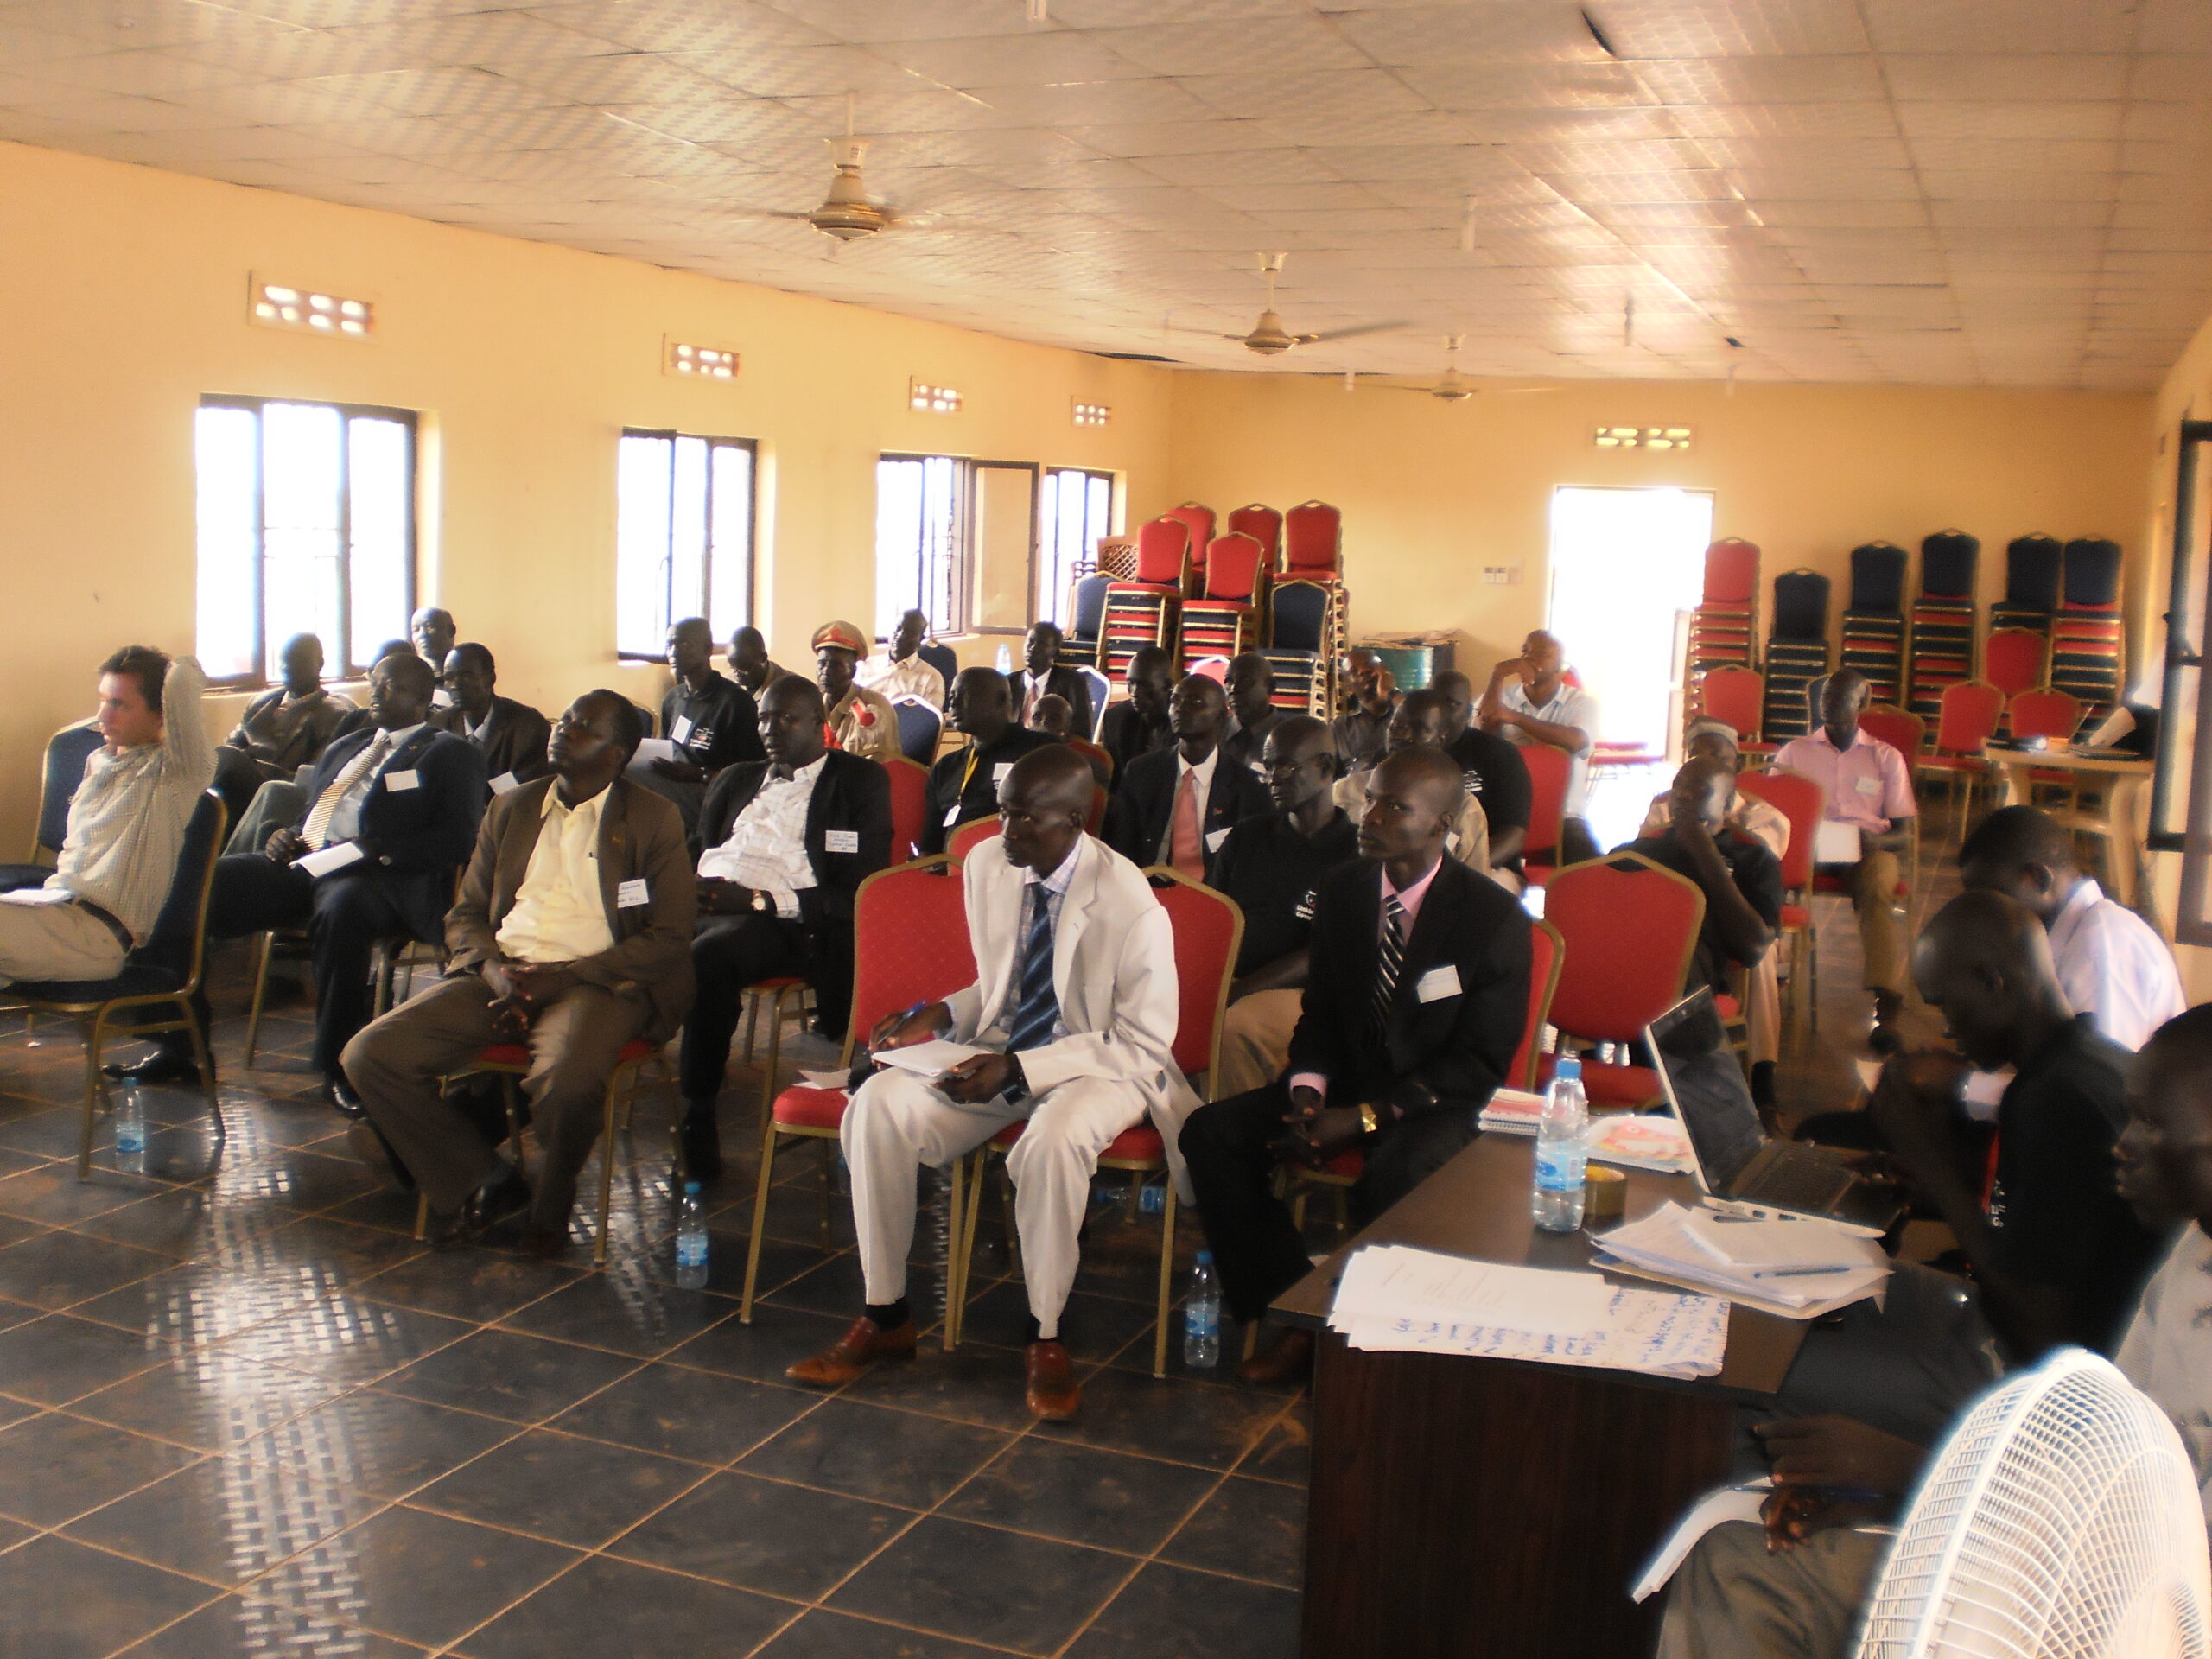 County commissioners from three states conducting a peace conference on cattle raiding in Unity State sponsored by the AECOM international with funding from USAID, 12 September 2012 (ST)